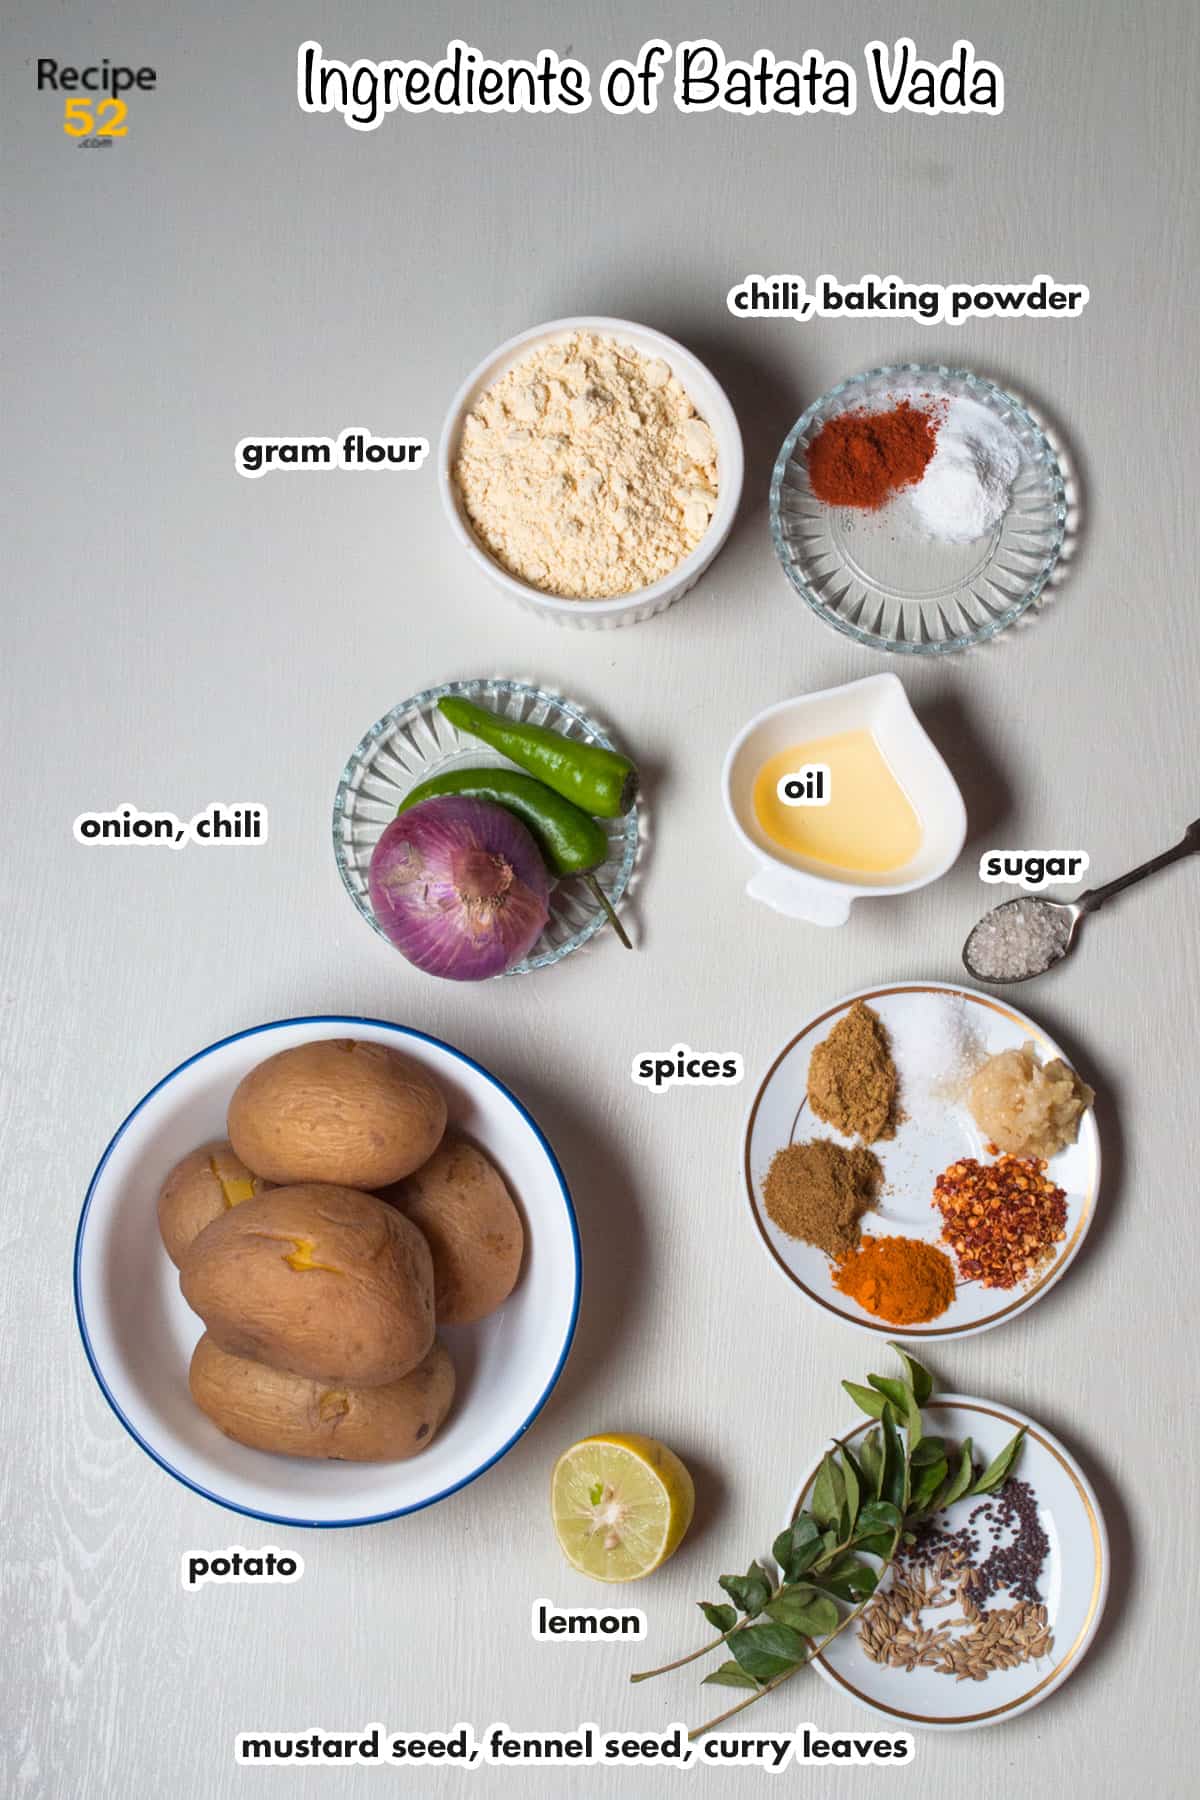 Ingredients of batata vada on the white background with marked labelling.